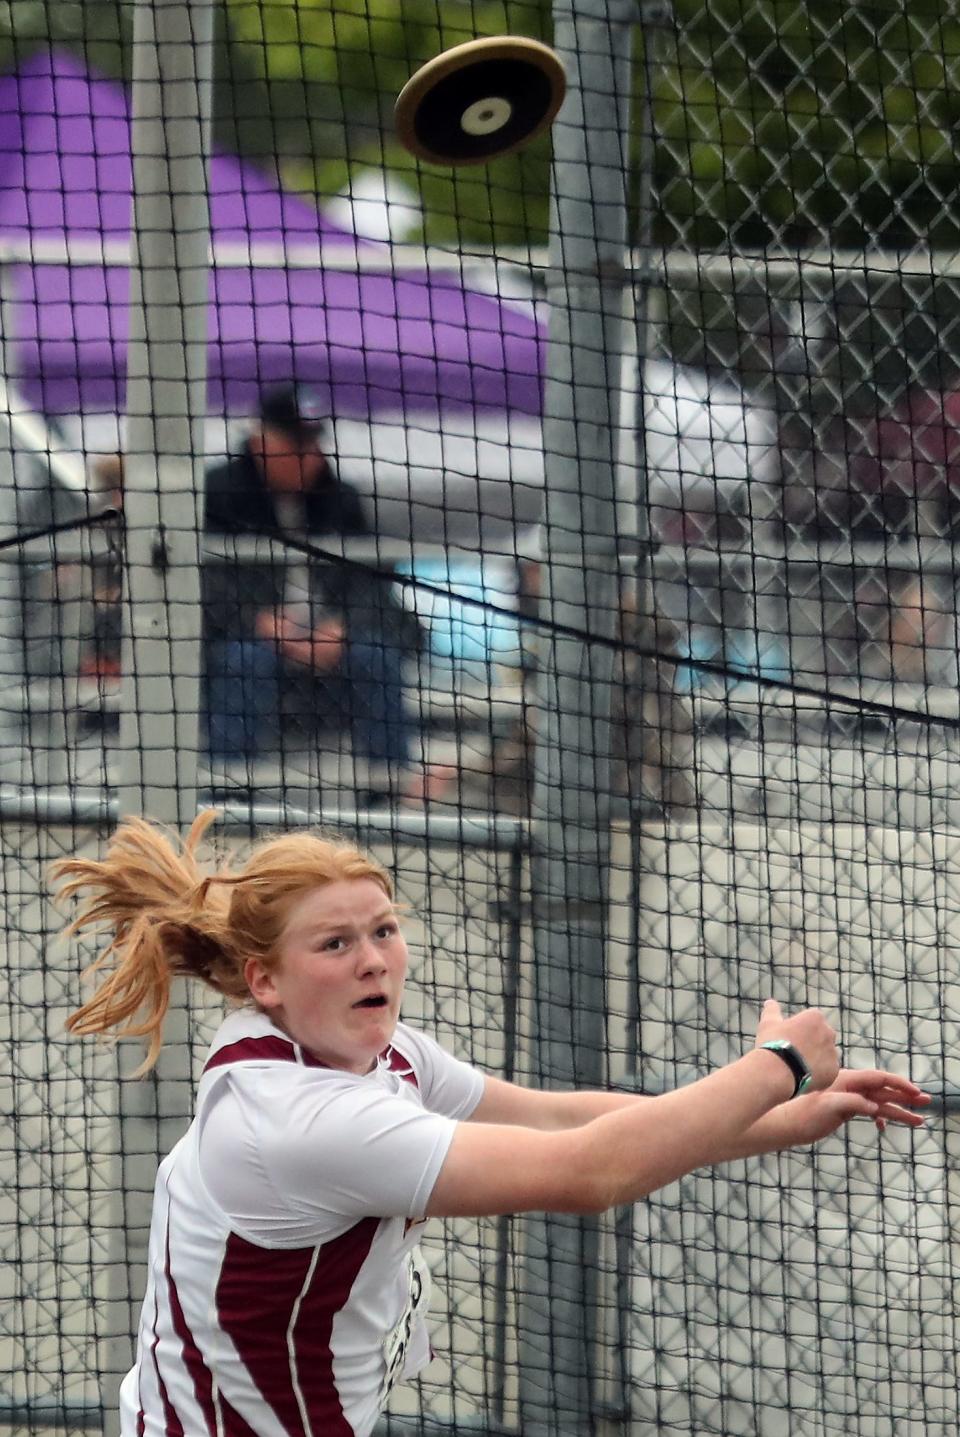 South Kitsap's Grace Degarimore throws the discus during the 4A State Track and Field Championships at Mt. Tahoma High School on Thursday, May 26, 2022.